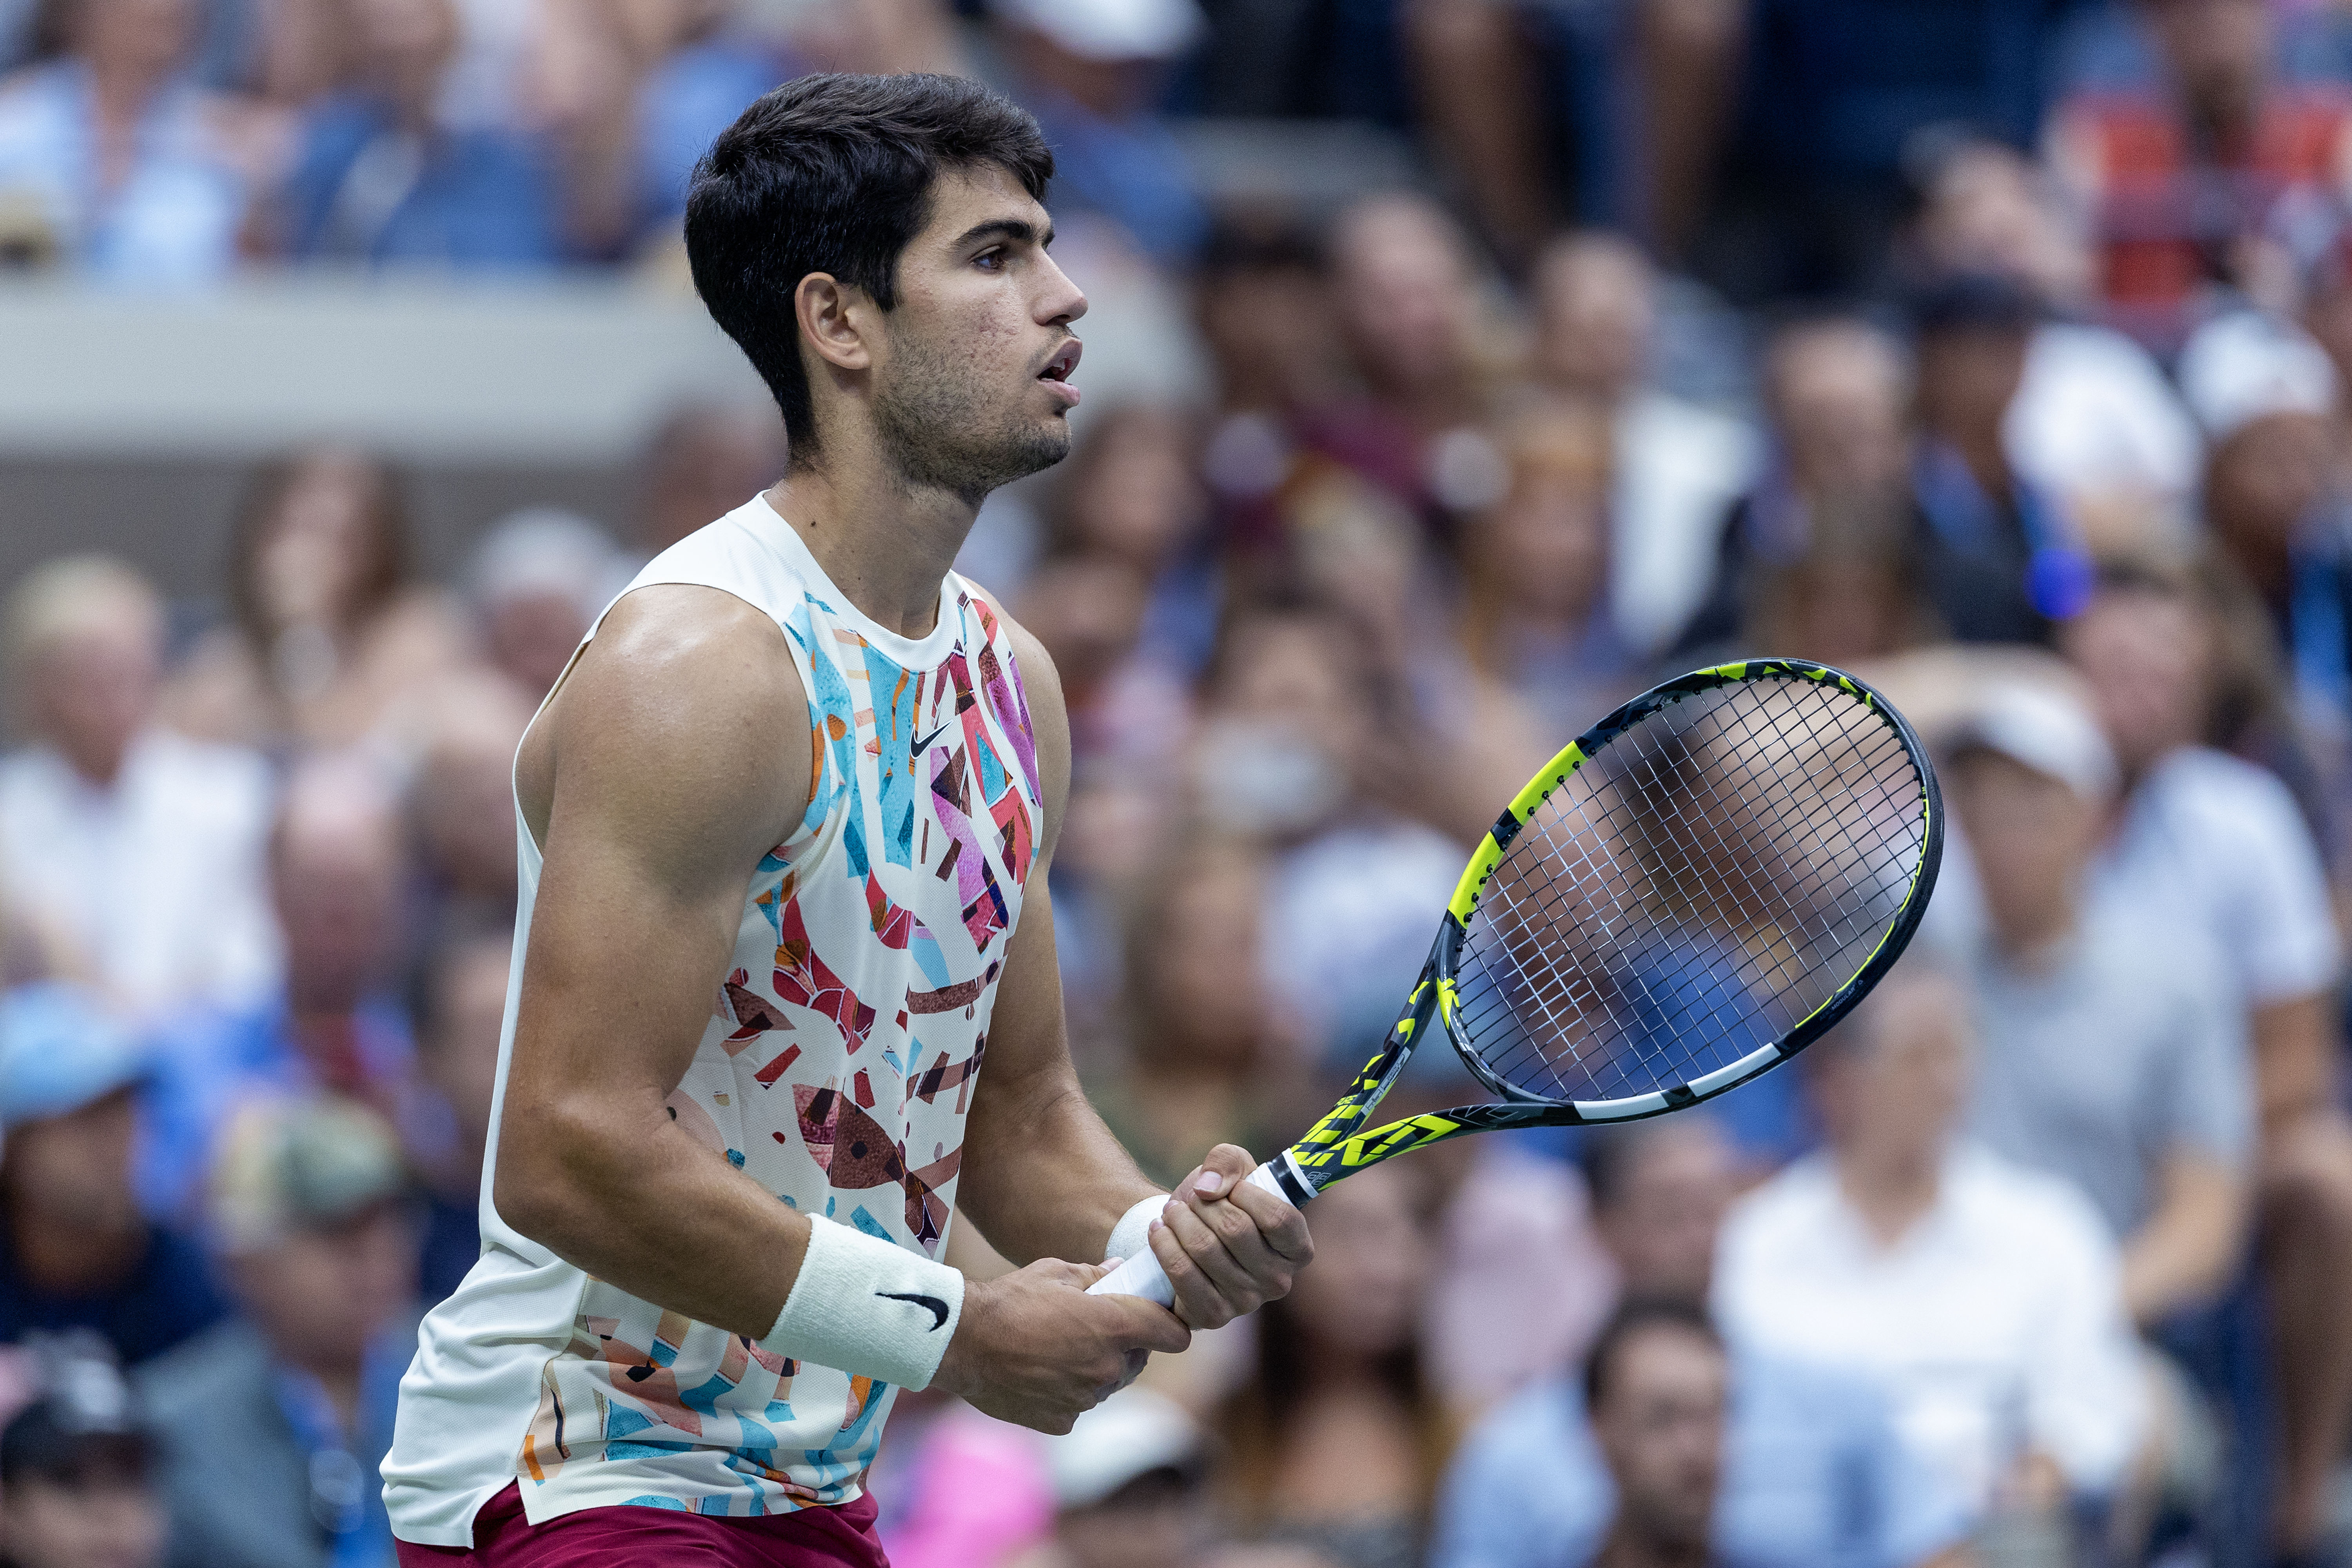 Carlos Alcaraz of Spain during his match against Matteo Arnaldi of Italy in the Men’s Singles round four match on Arthur Ashe Stadium during the US Open Tennis Championship 2023 at the USTA National Tennis Centre on September 4th, 2023 in Flushing, Queens, New York City.